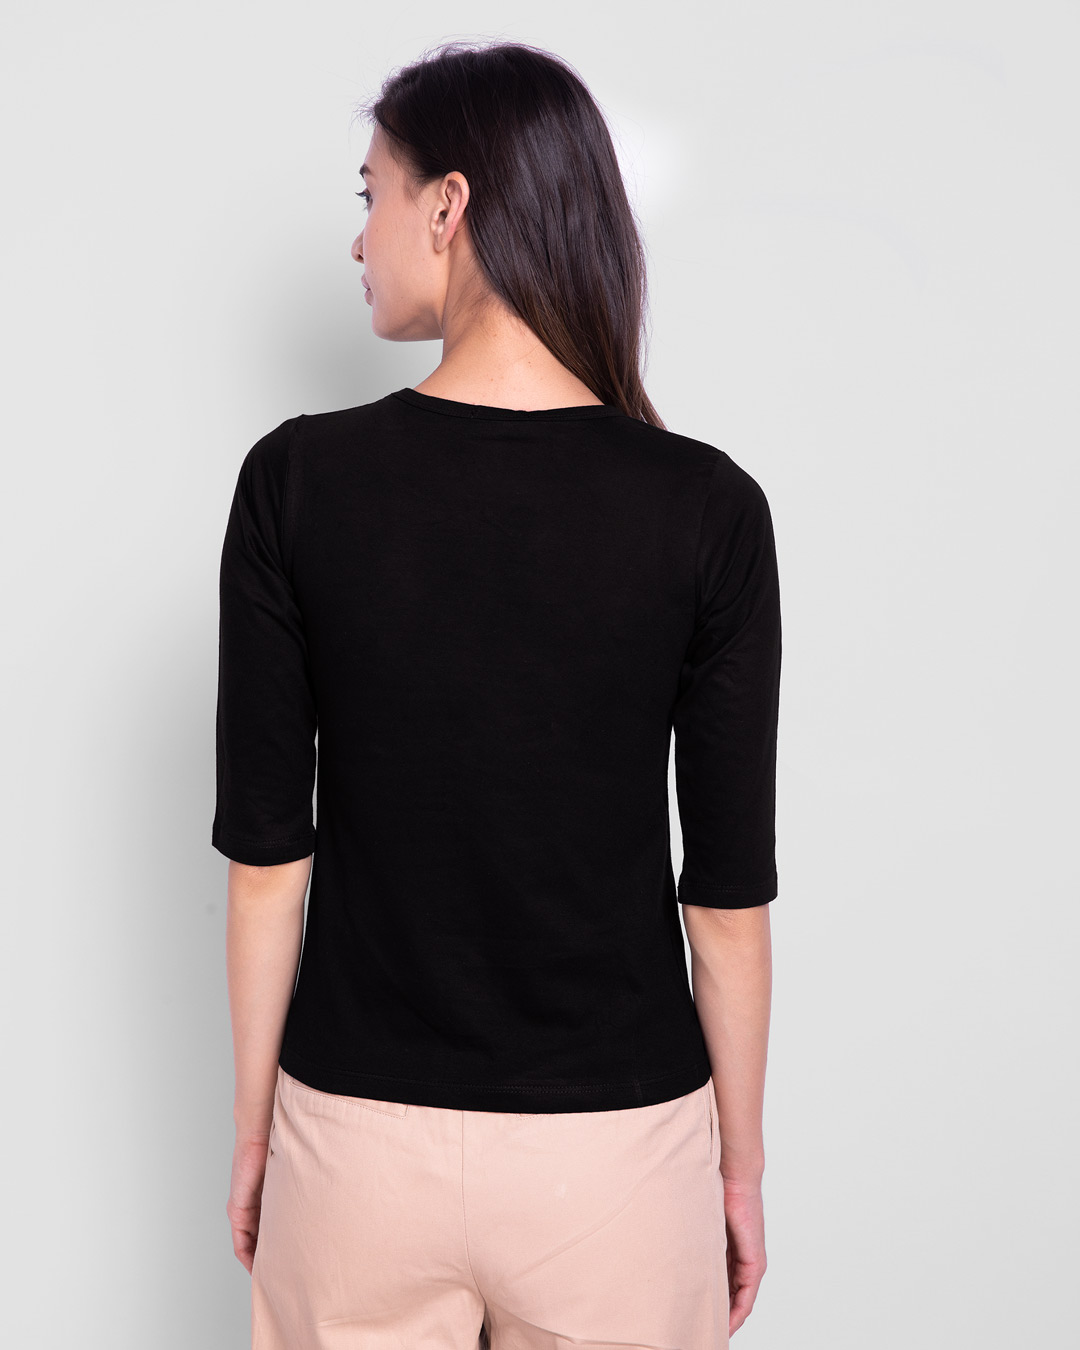 Shop Black Is My Color Round Neck 3/4th Sleeve T-Shirt Black-Back